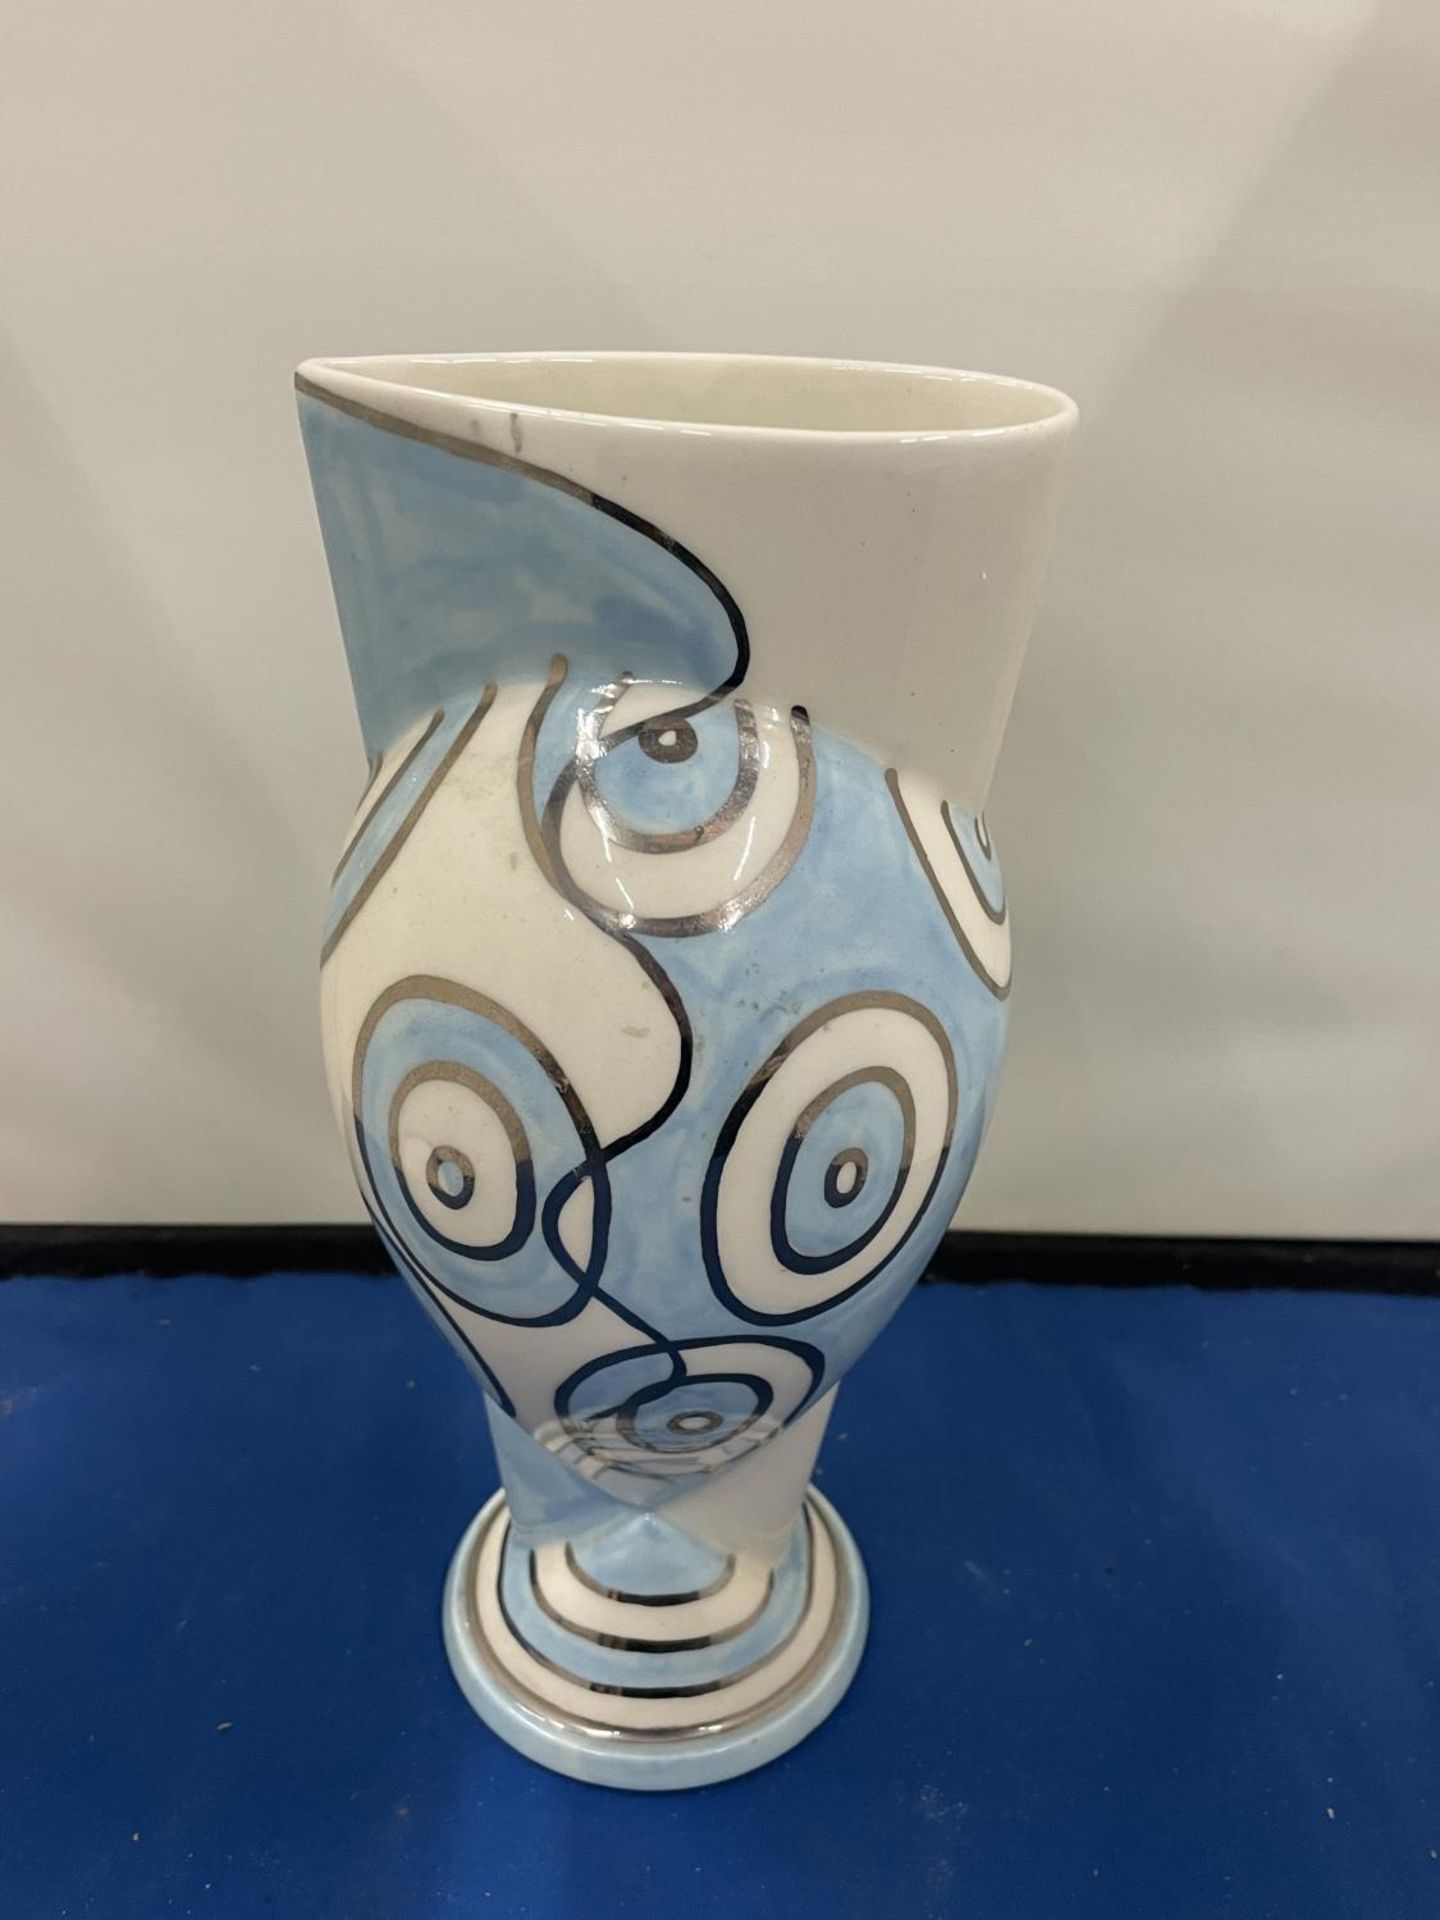 A LIMITED EDITION 8/250 SMIC VASE BY COLIN DOWNES IN THE STYLE OF CLARICE CLIFF - Image 6 of 8